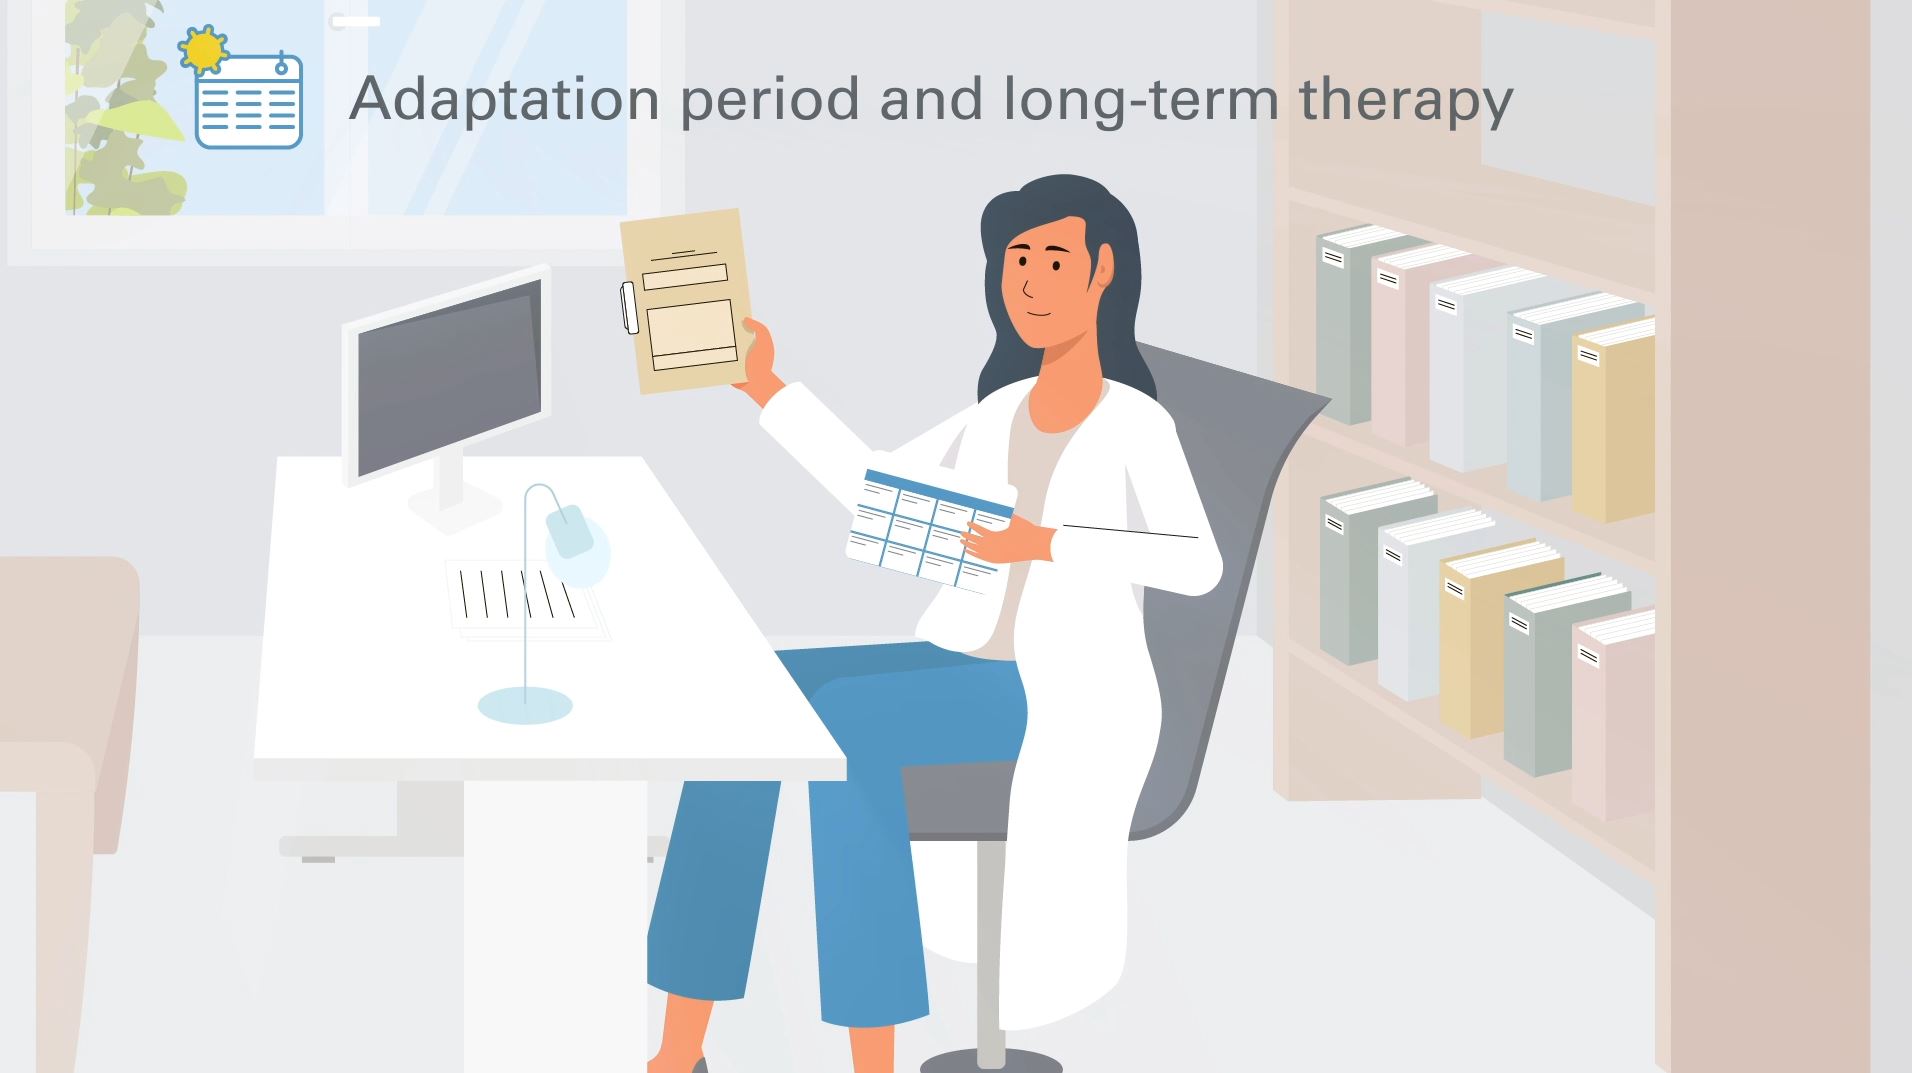 How to video - Adjusting settings during the adaptation period and long-term therapy